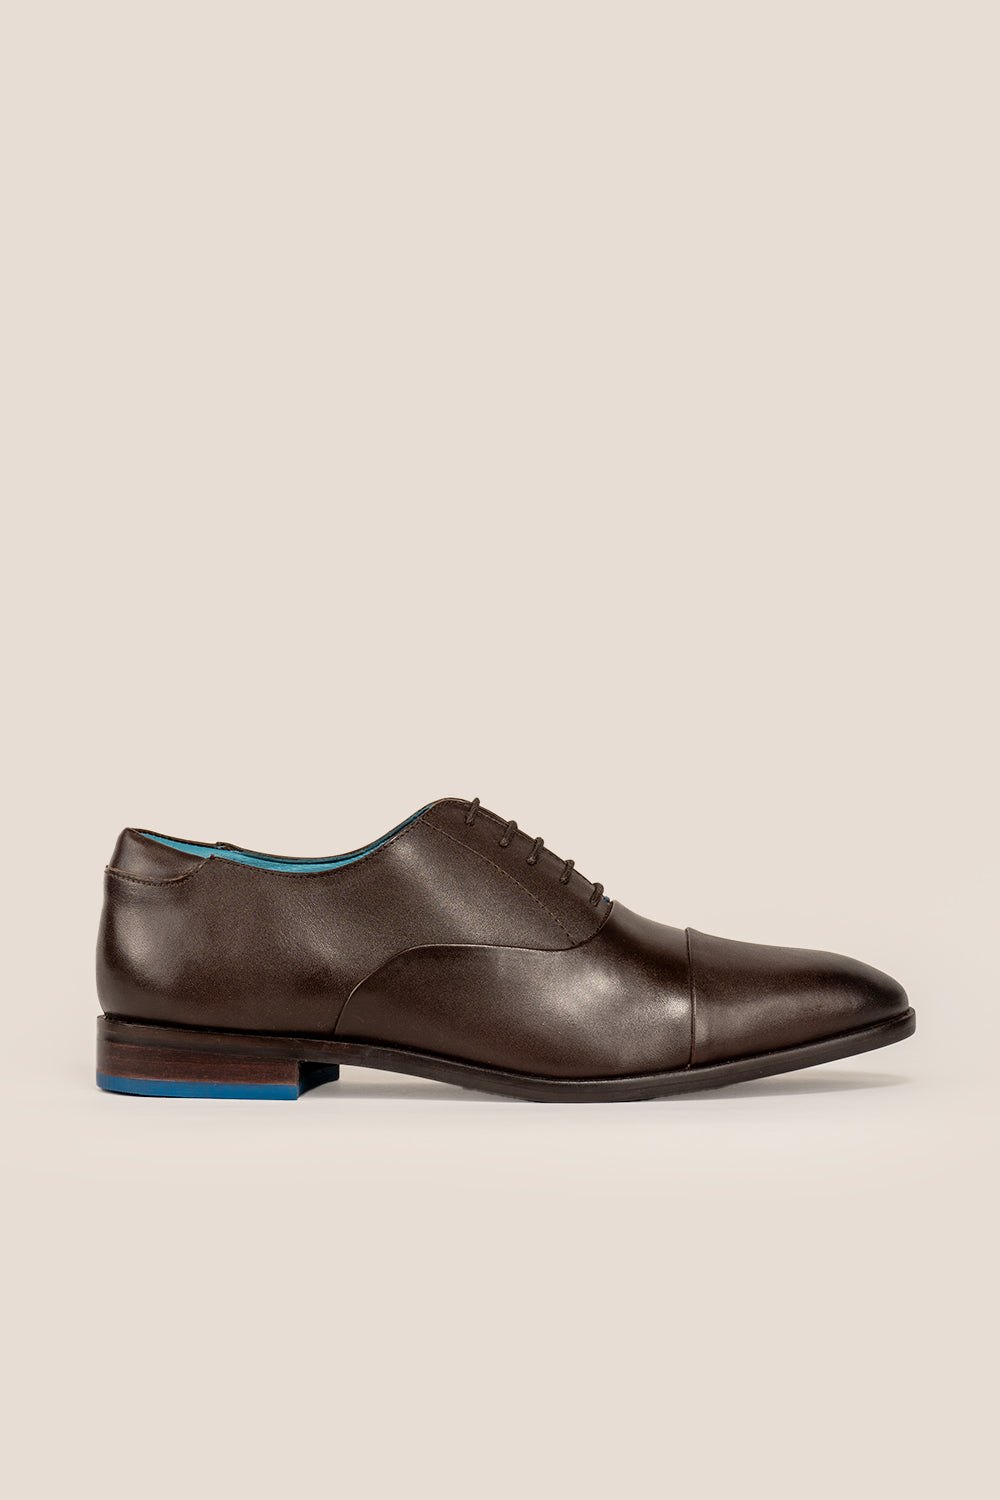 Hadley Brown Oxford shoes oswin hyde